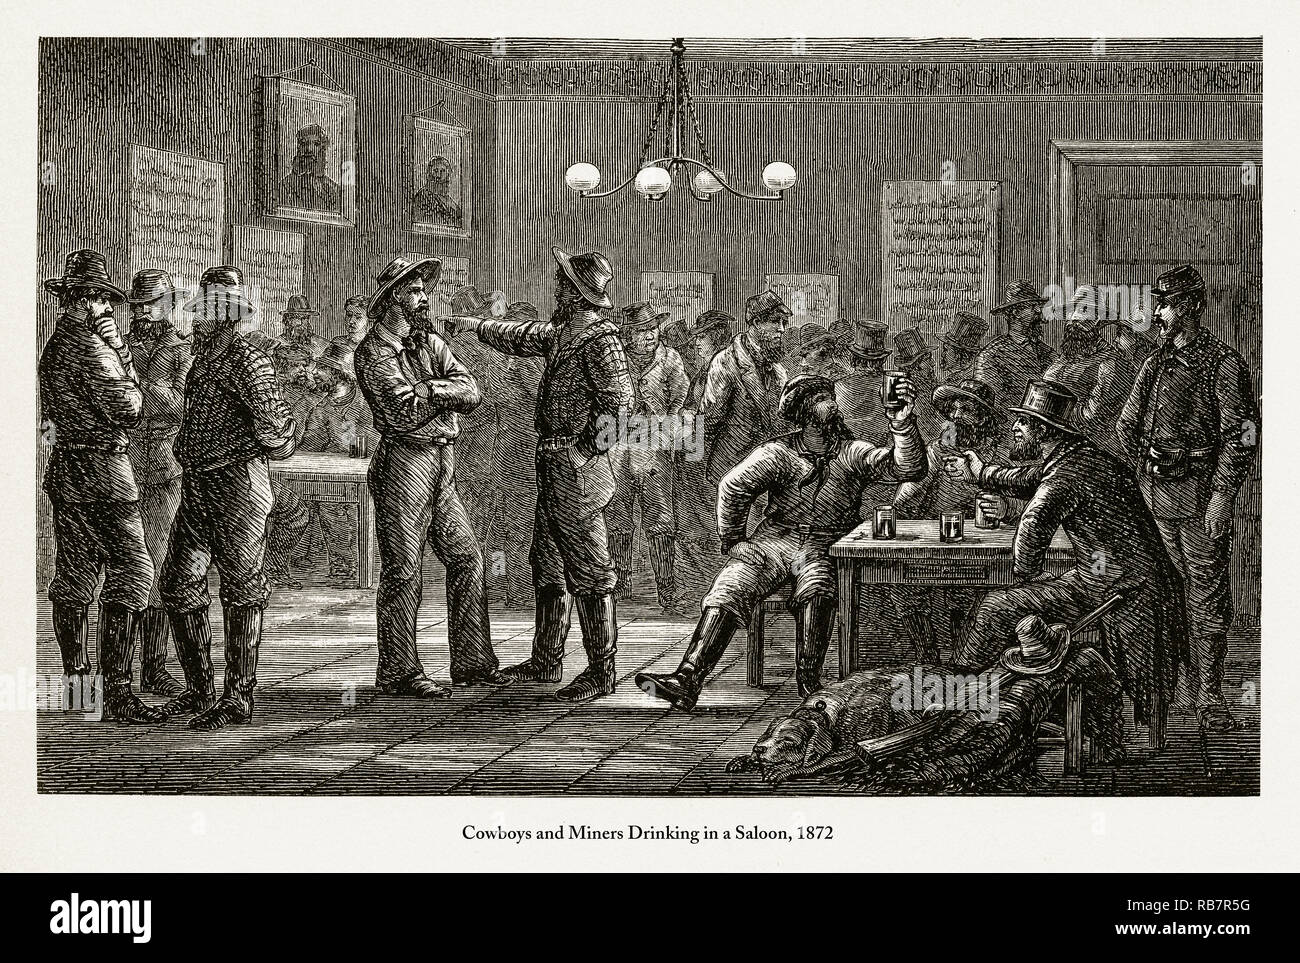 Cowboys and Miners Drinking in a Saloon Engraving, 1872 Stock Photo